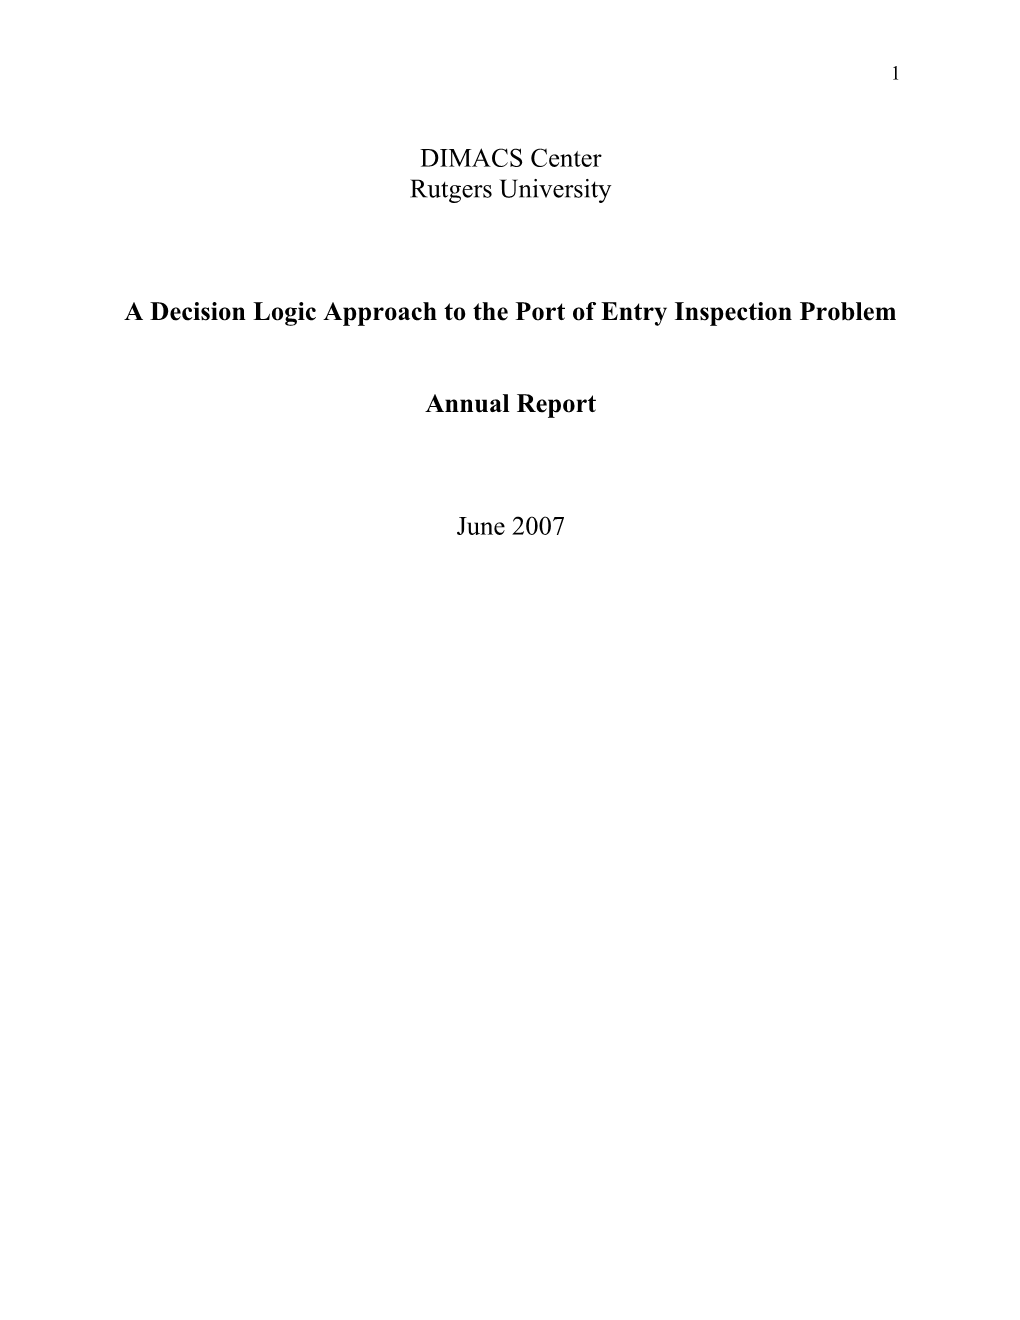 A Decision Logic Approach to the Port of Entry Inspection Problem